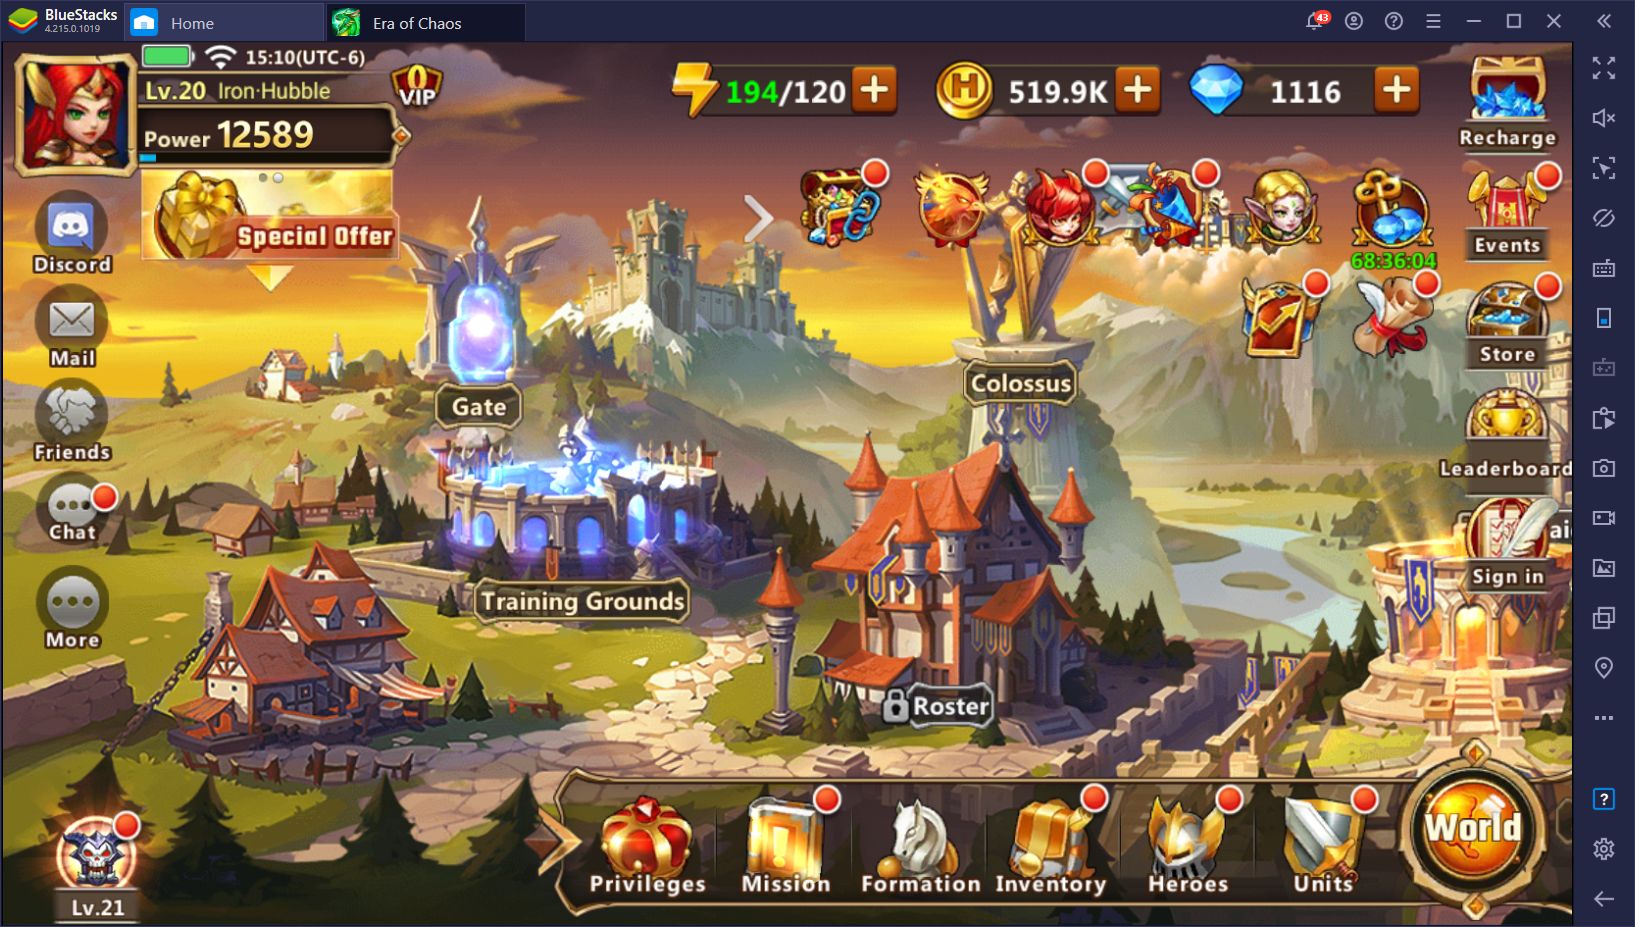 download might and magic heroes era of chaos